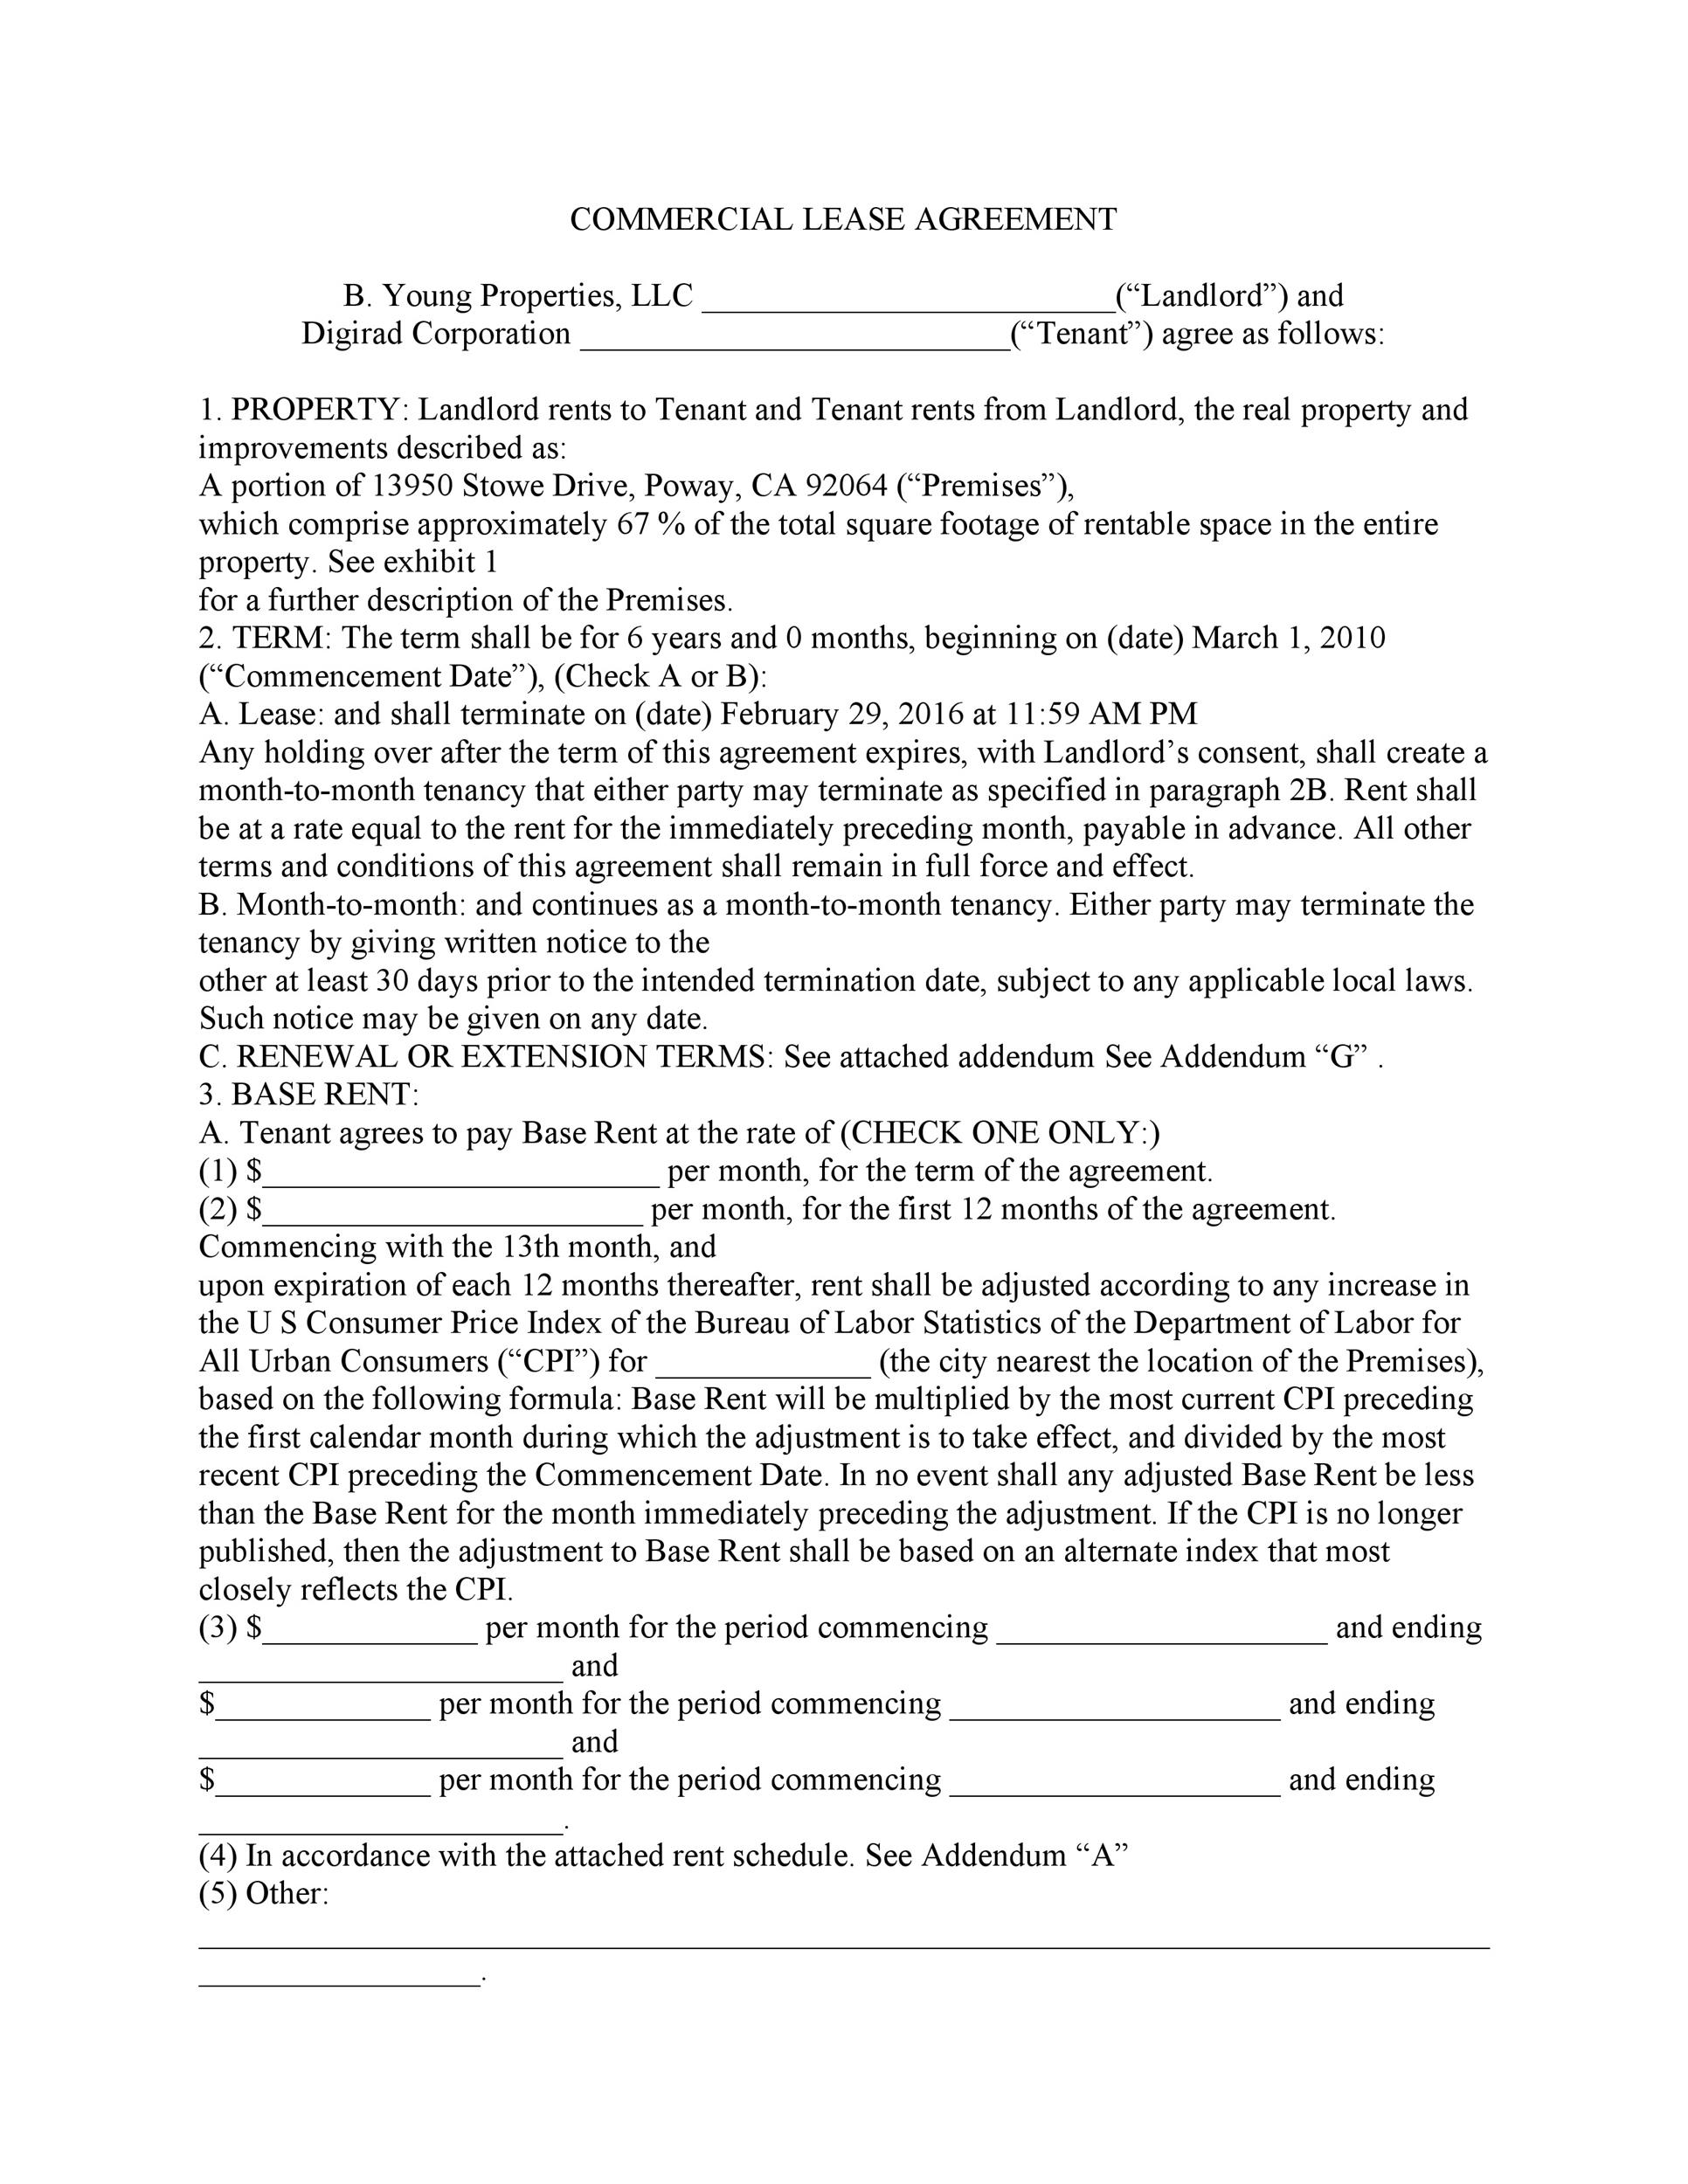 26 Free Commercial Lease Agreement Templates ᐅ Templatelab